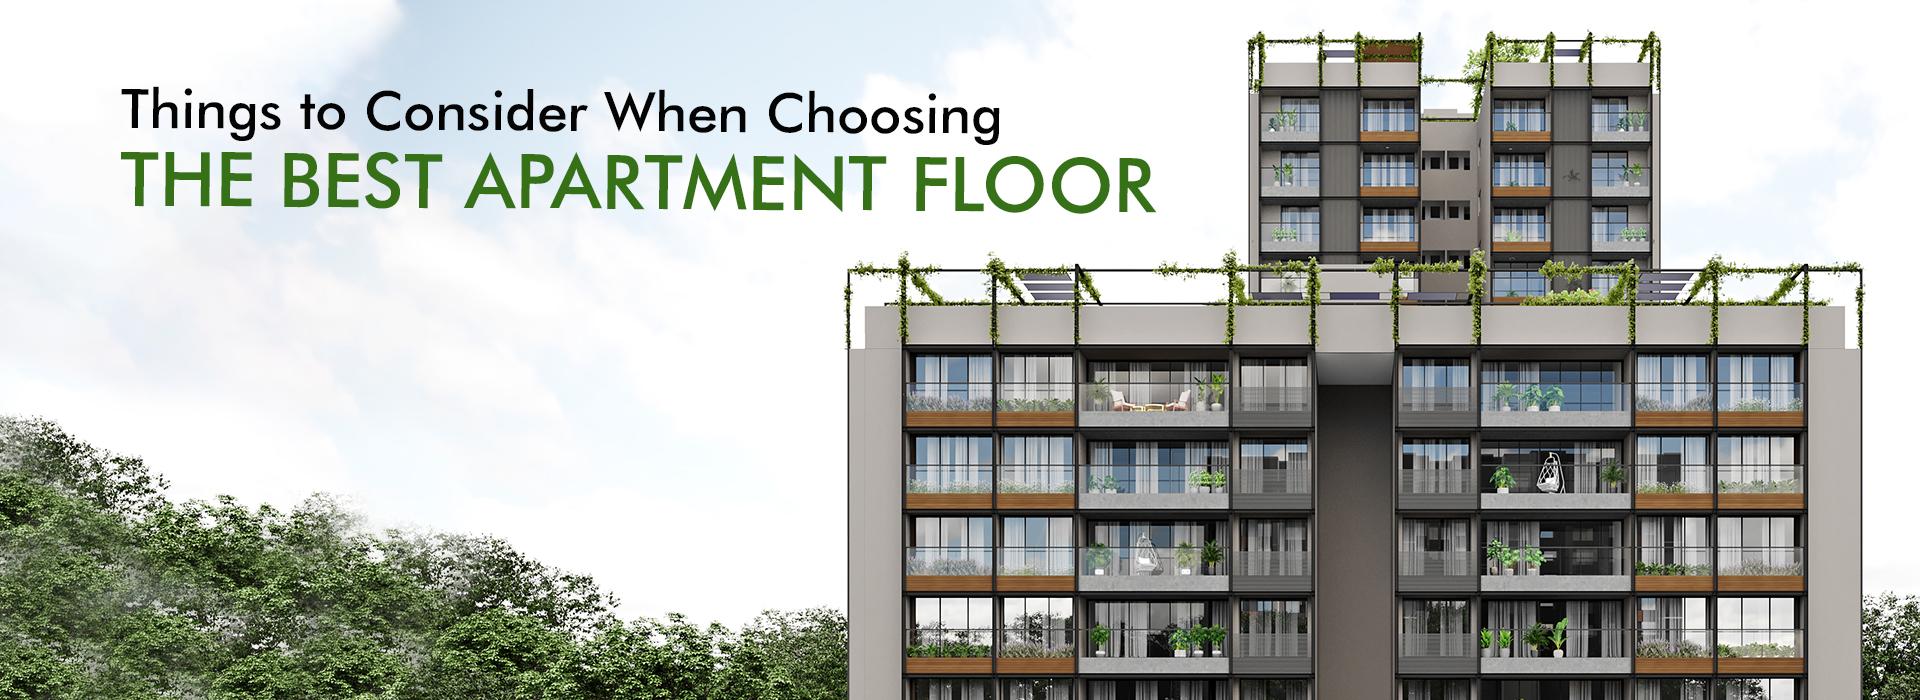 What Things to Consider When Choosing the Best Apartment Floor?